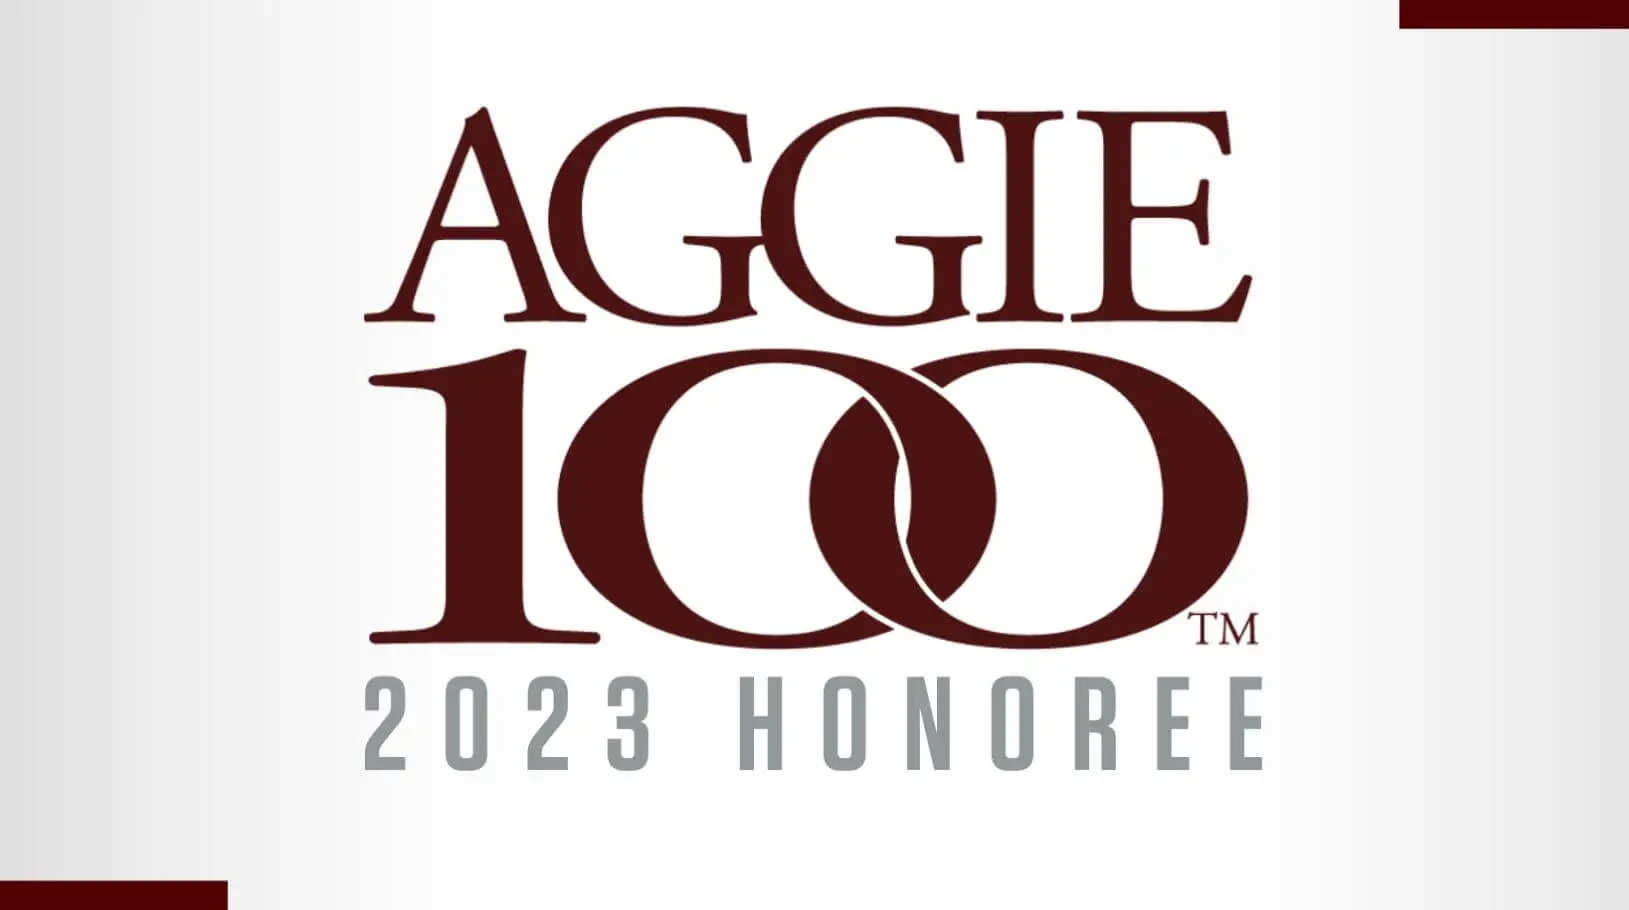 Farmer Law PC is Proud to be Named a 2023 Aggie Honoree!